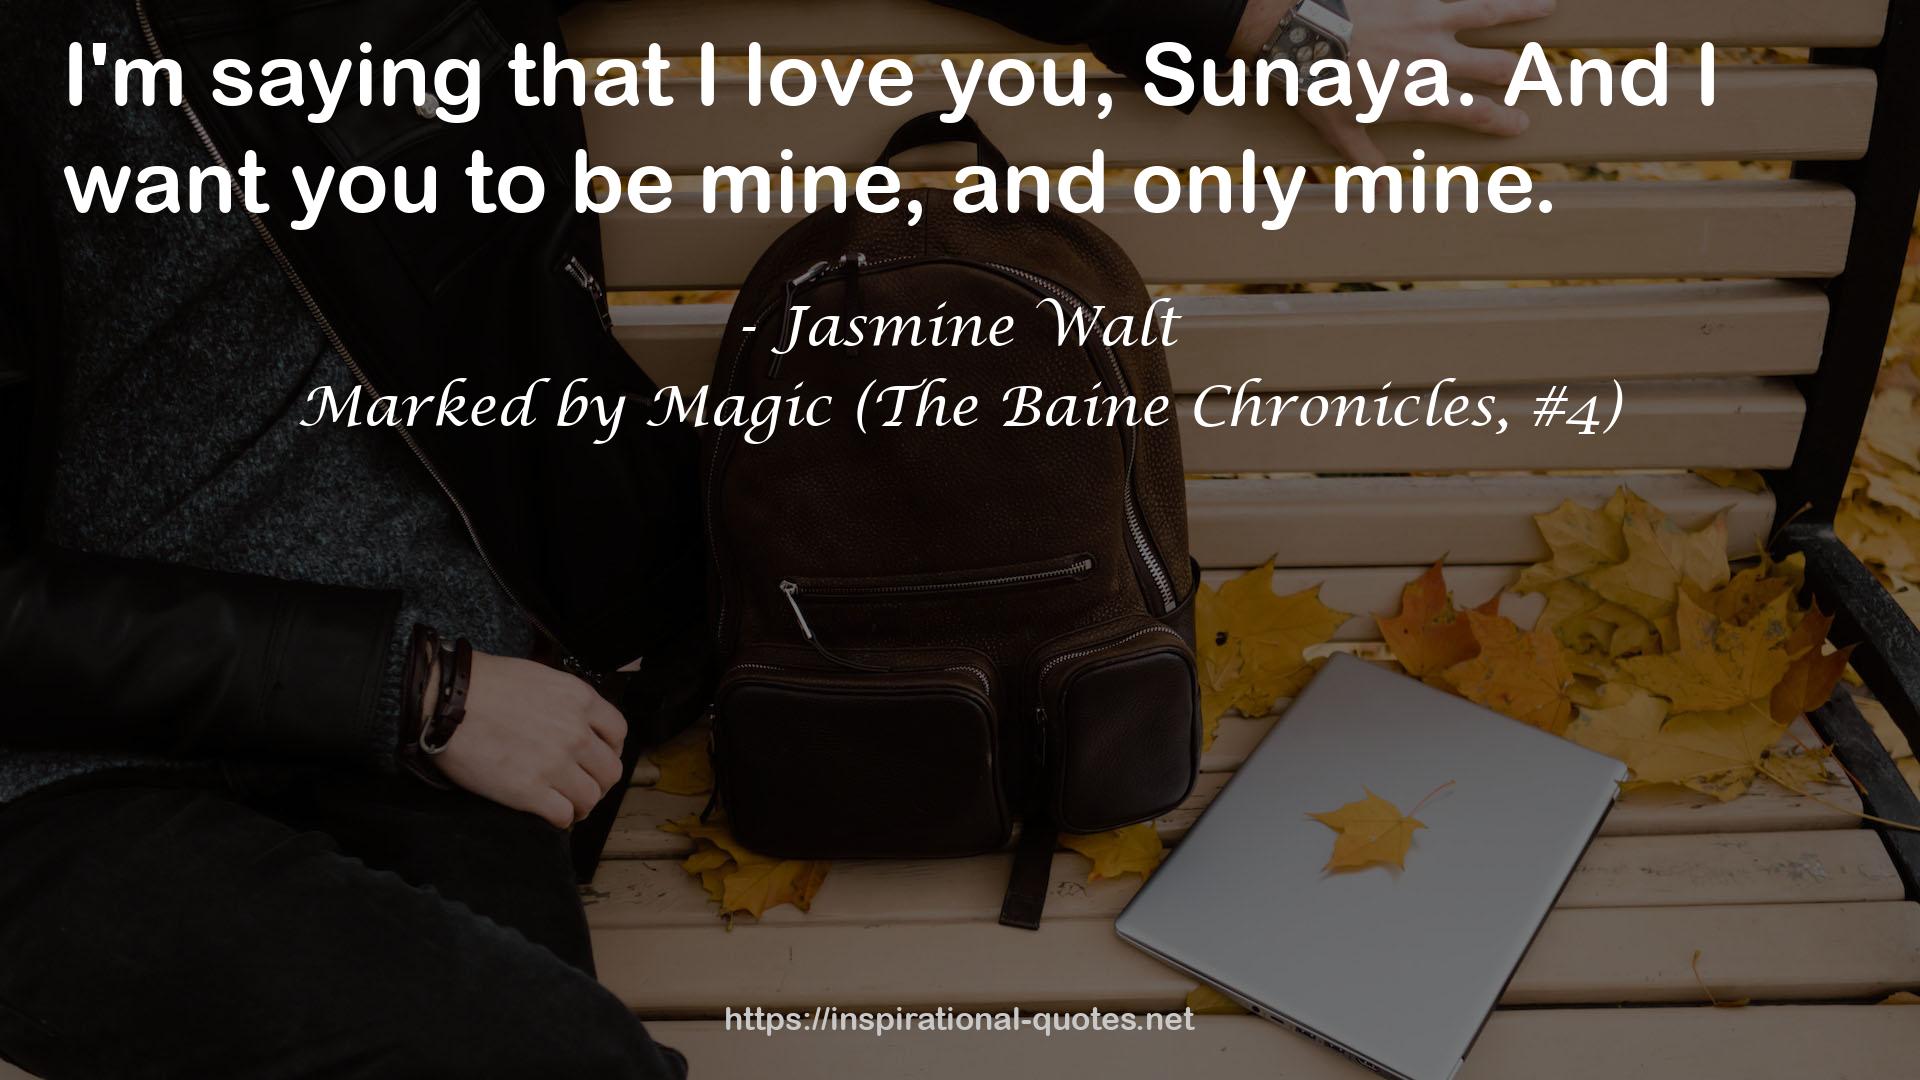 Marked by Magic (The Baine Chronicles, #4) QUOTES